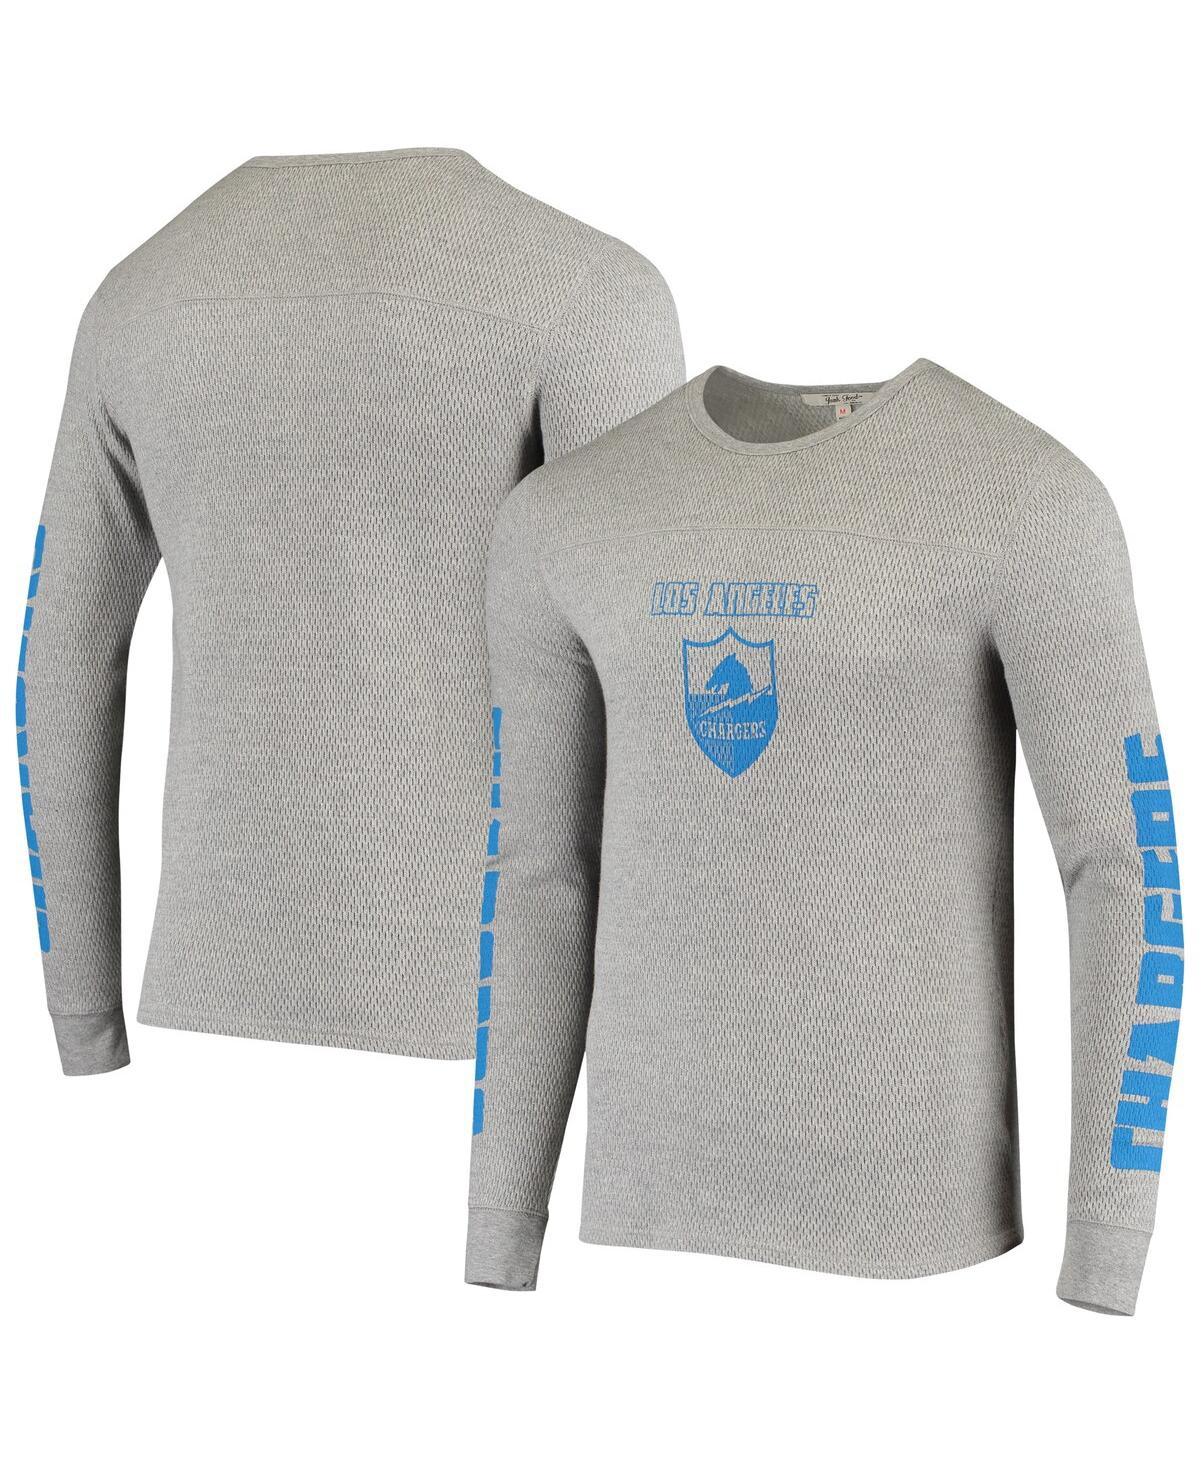 Men's Junk Food Heathered Gray Los Angeles Chargers Heavyweight Thermal Long Sleeve T-shirt - Heathered Gray